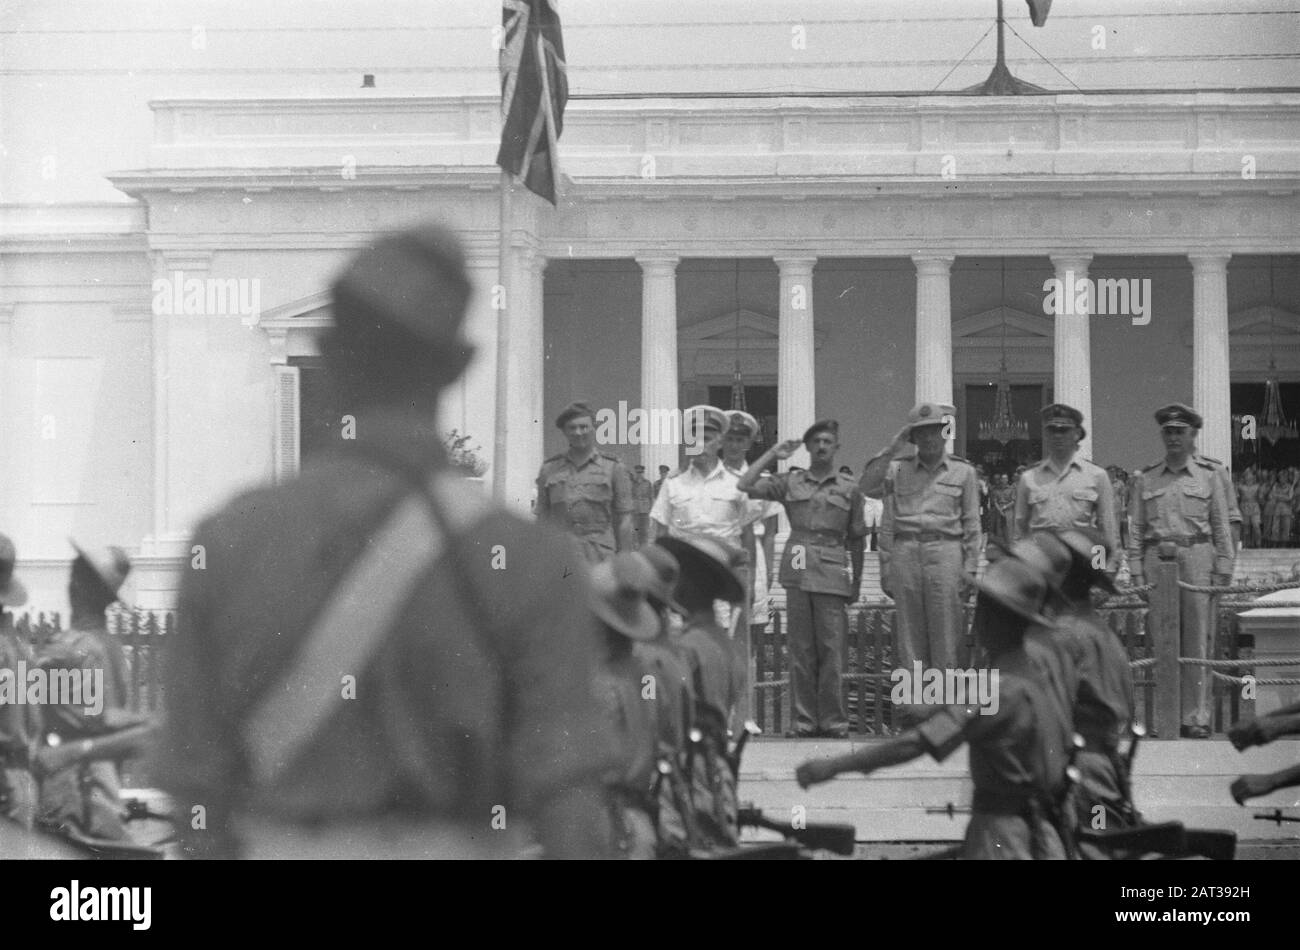 Celebrations in the transfer and withdrawal of British troops from Indonesia  The defilé is taken in front of the palace of the Lieutenant Governor General H.J. van Mook Annotation: Ghurkas pass. Seen on the back Pijpers 7 December Division Date: 22 November 1946 Location: Batavia, Indonesia, Jakarta, Dutch East Indies Stock Photo